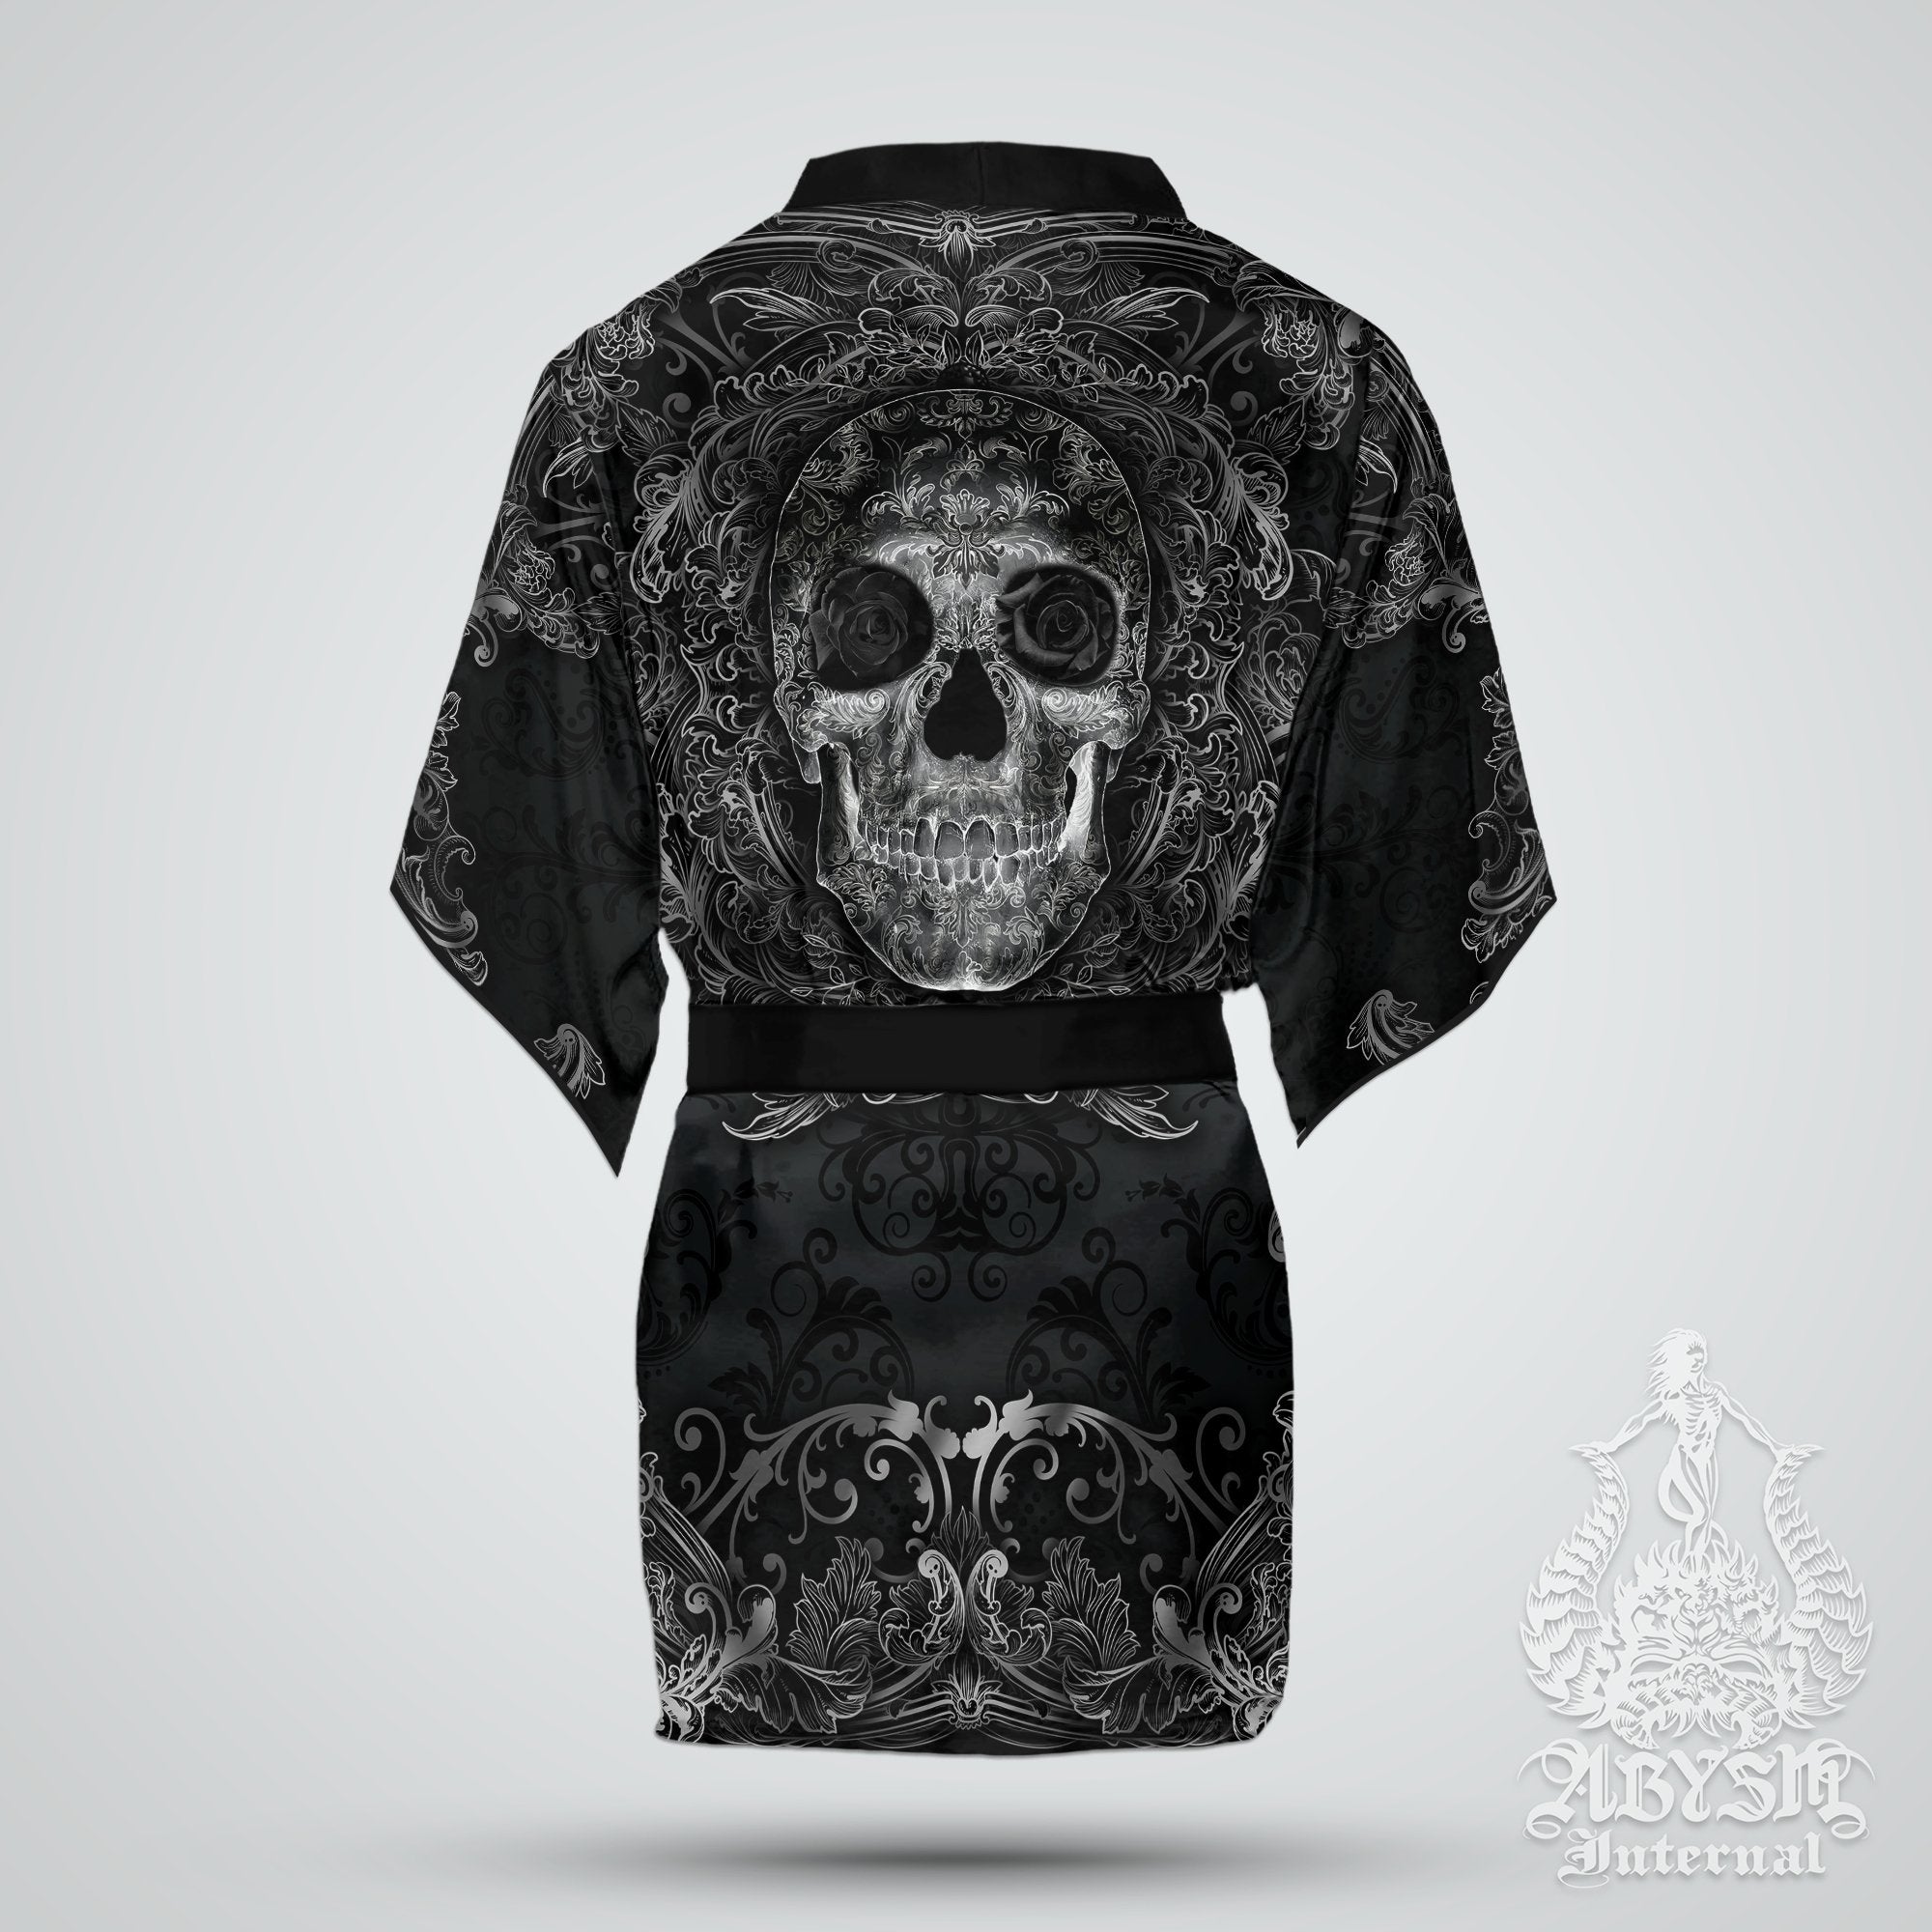 Skull Cover Up, Beach Outfit, Party Kimono, Summer Festival Robe, Gothic Indie and Alternative Clothing, Unisex - Dark - Abysm Internal